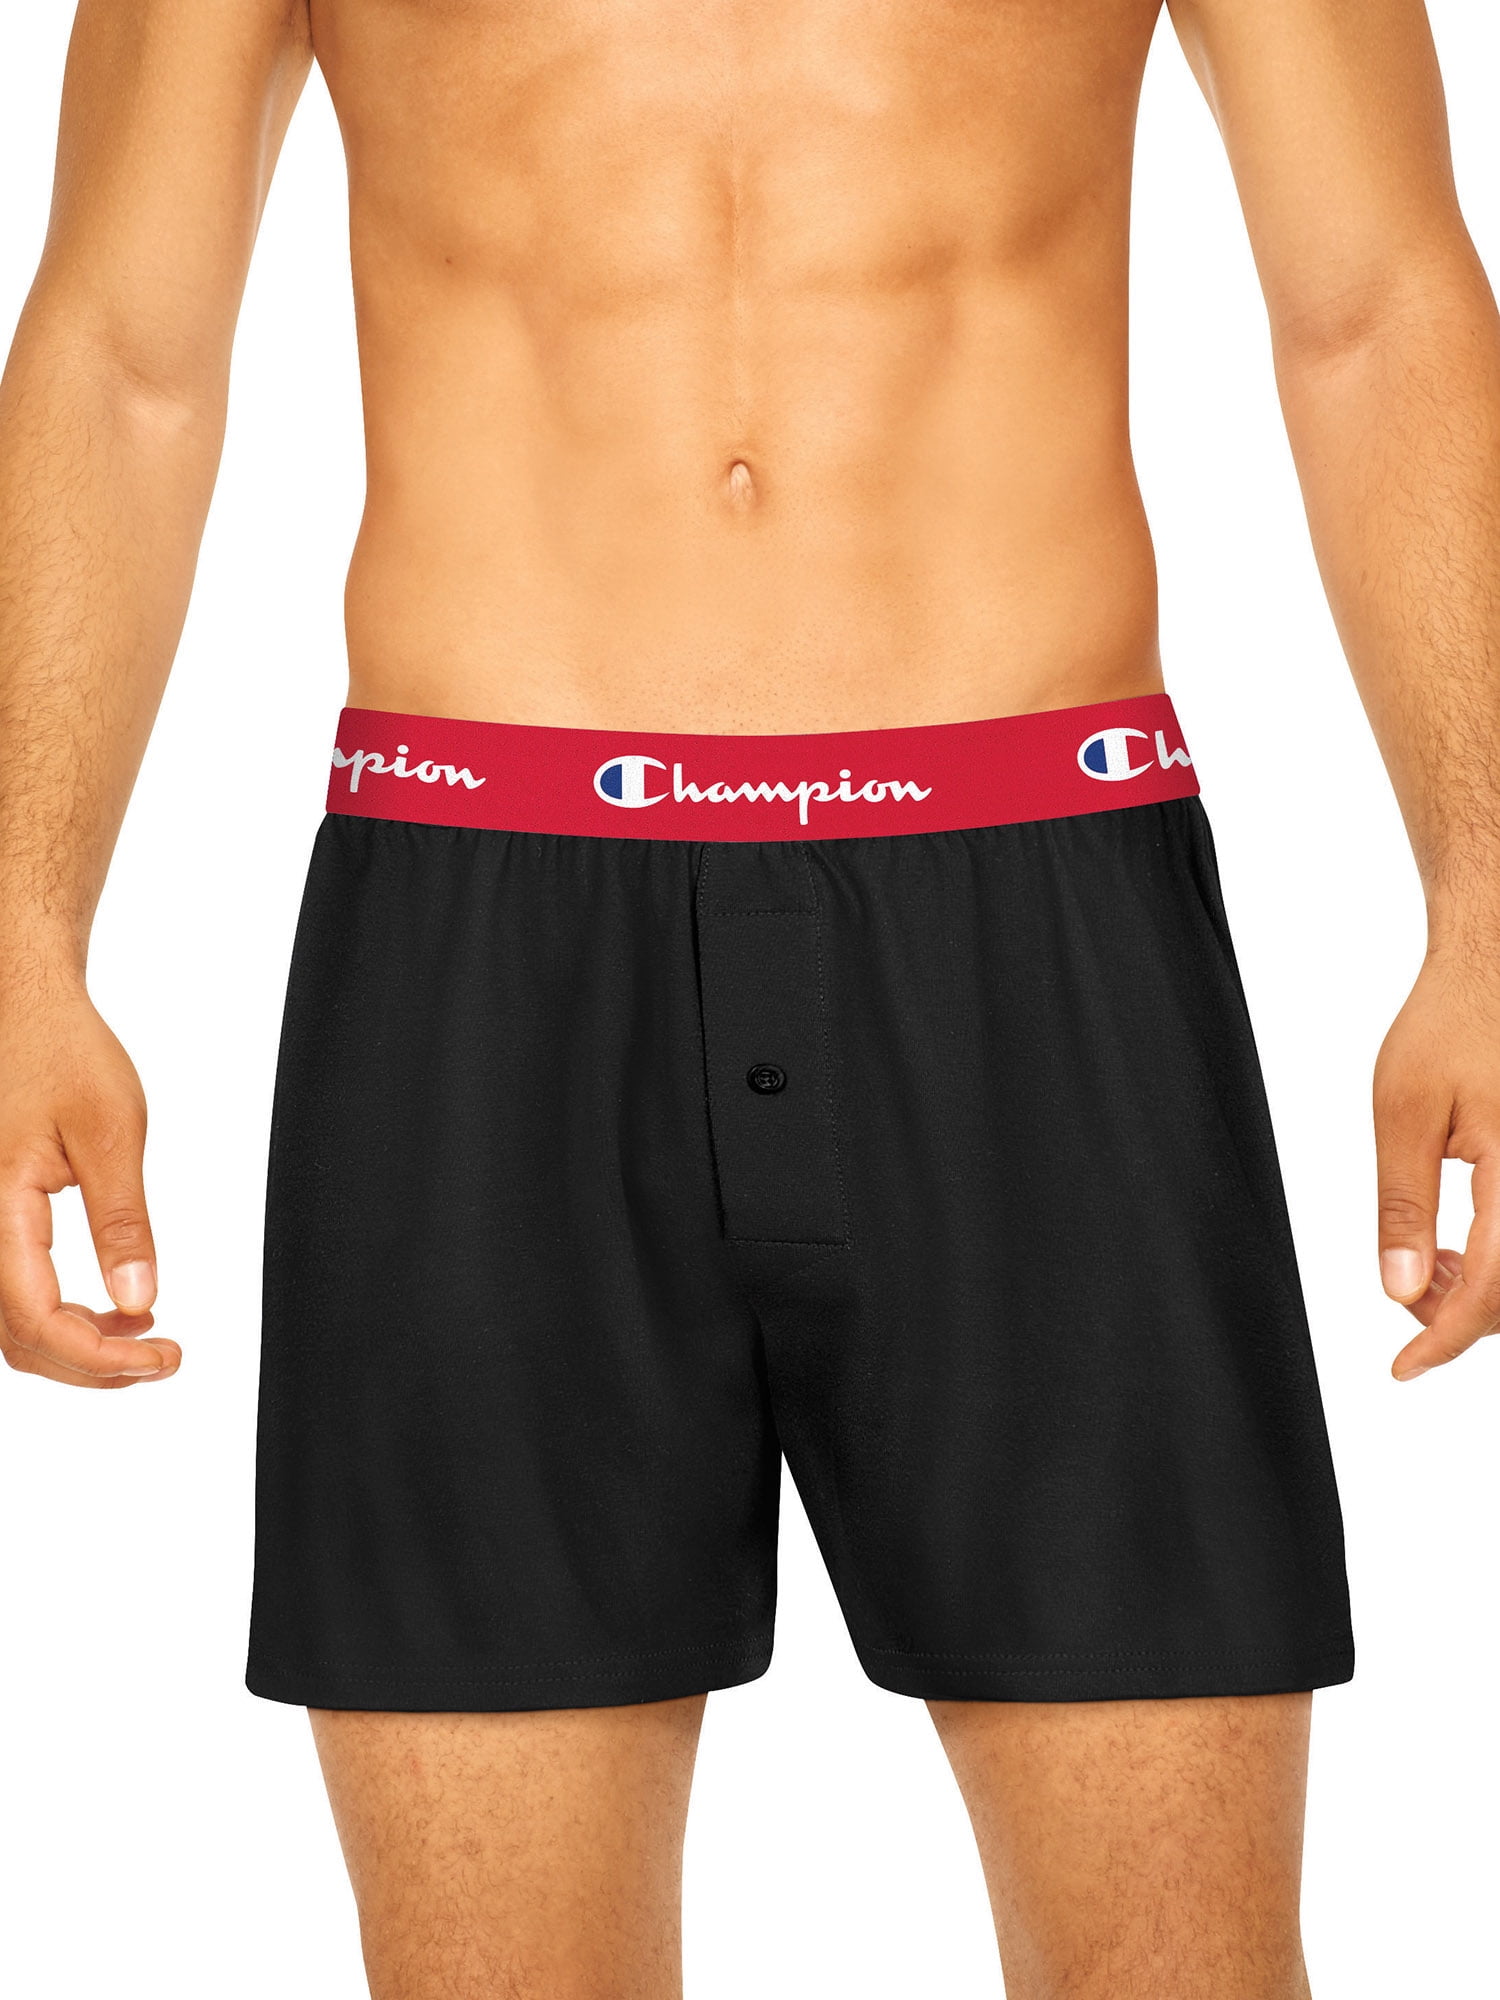 Pack of 3 Champion Men's Everyday Cotton Stretch Knit Boxer 